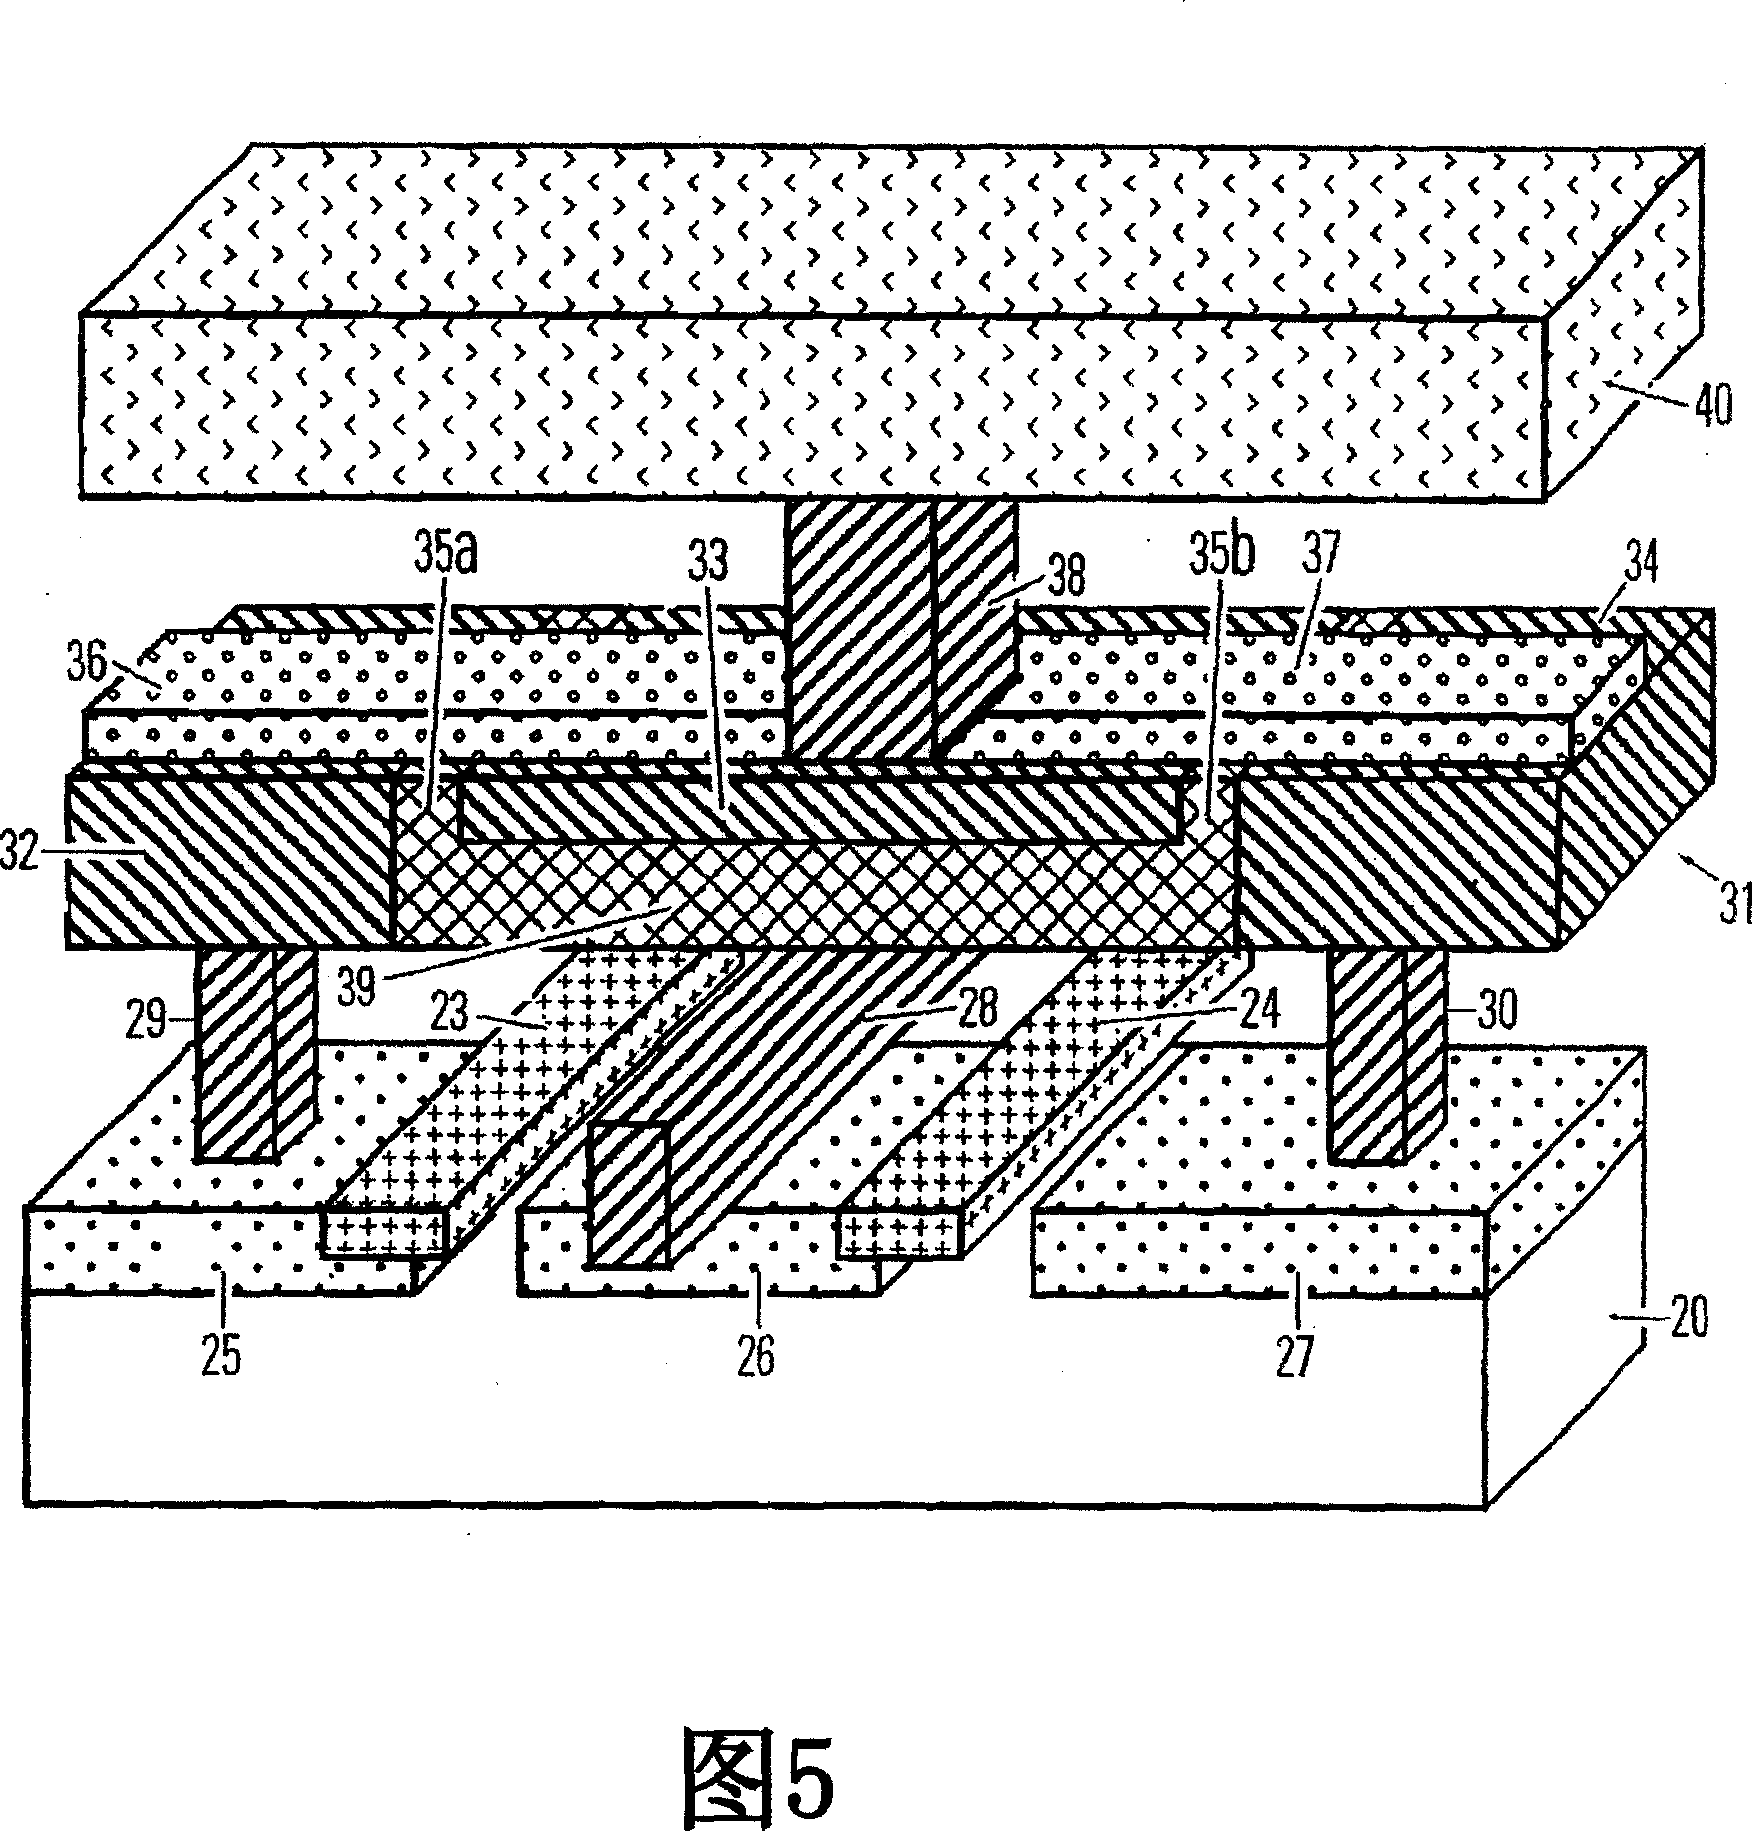 Phase change memory cell and manufacturing method